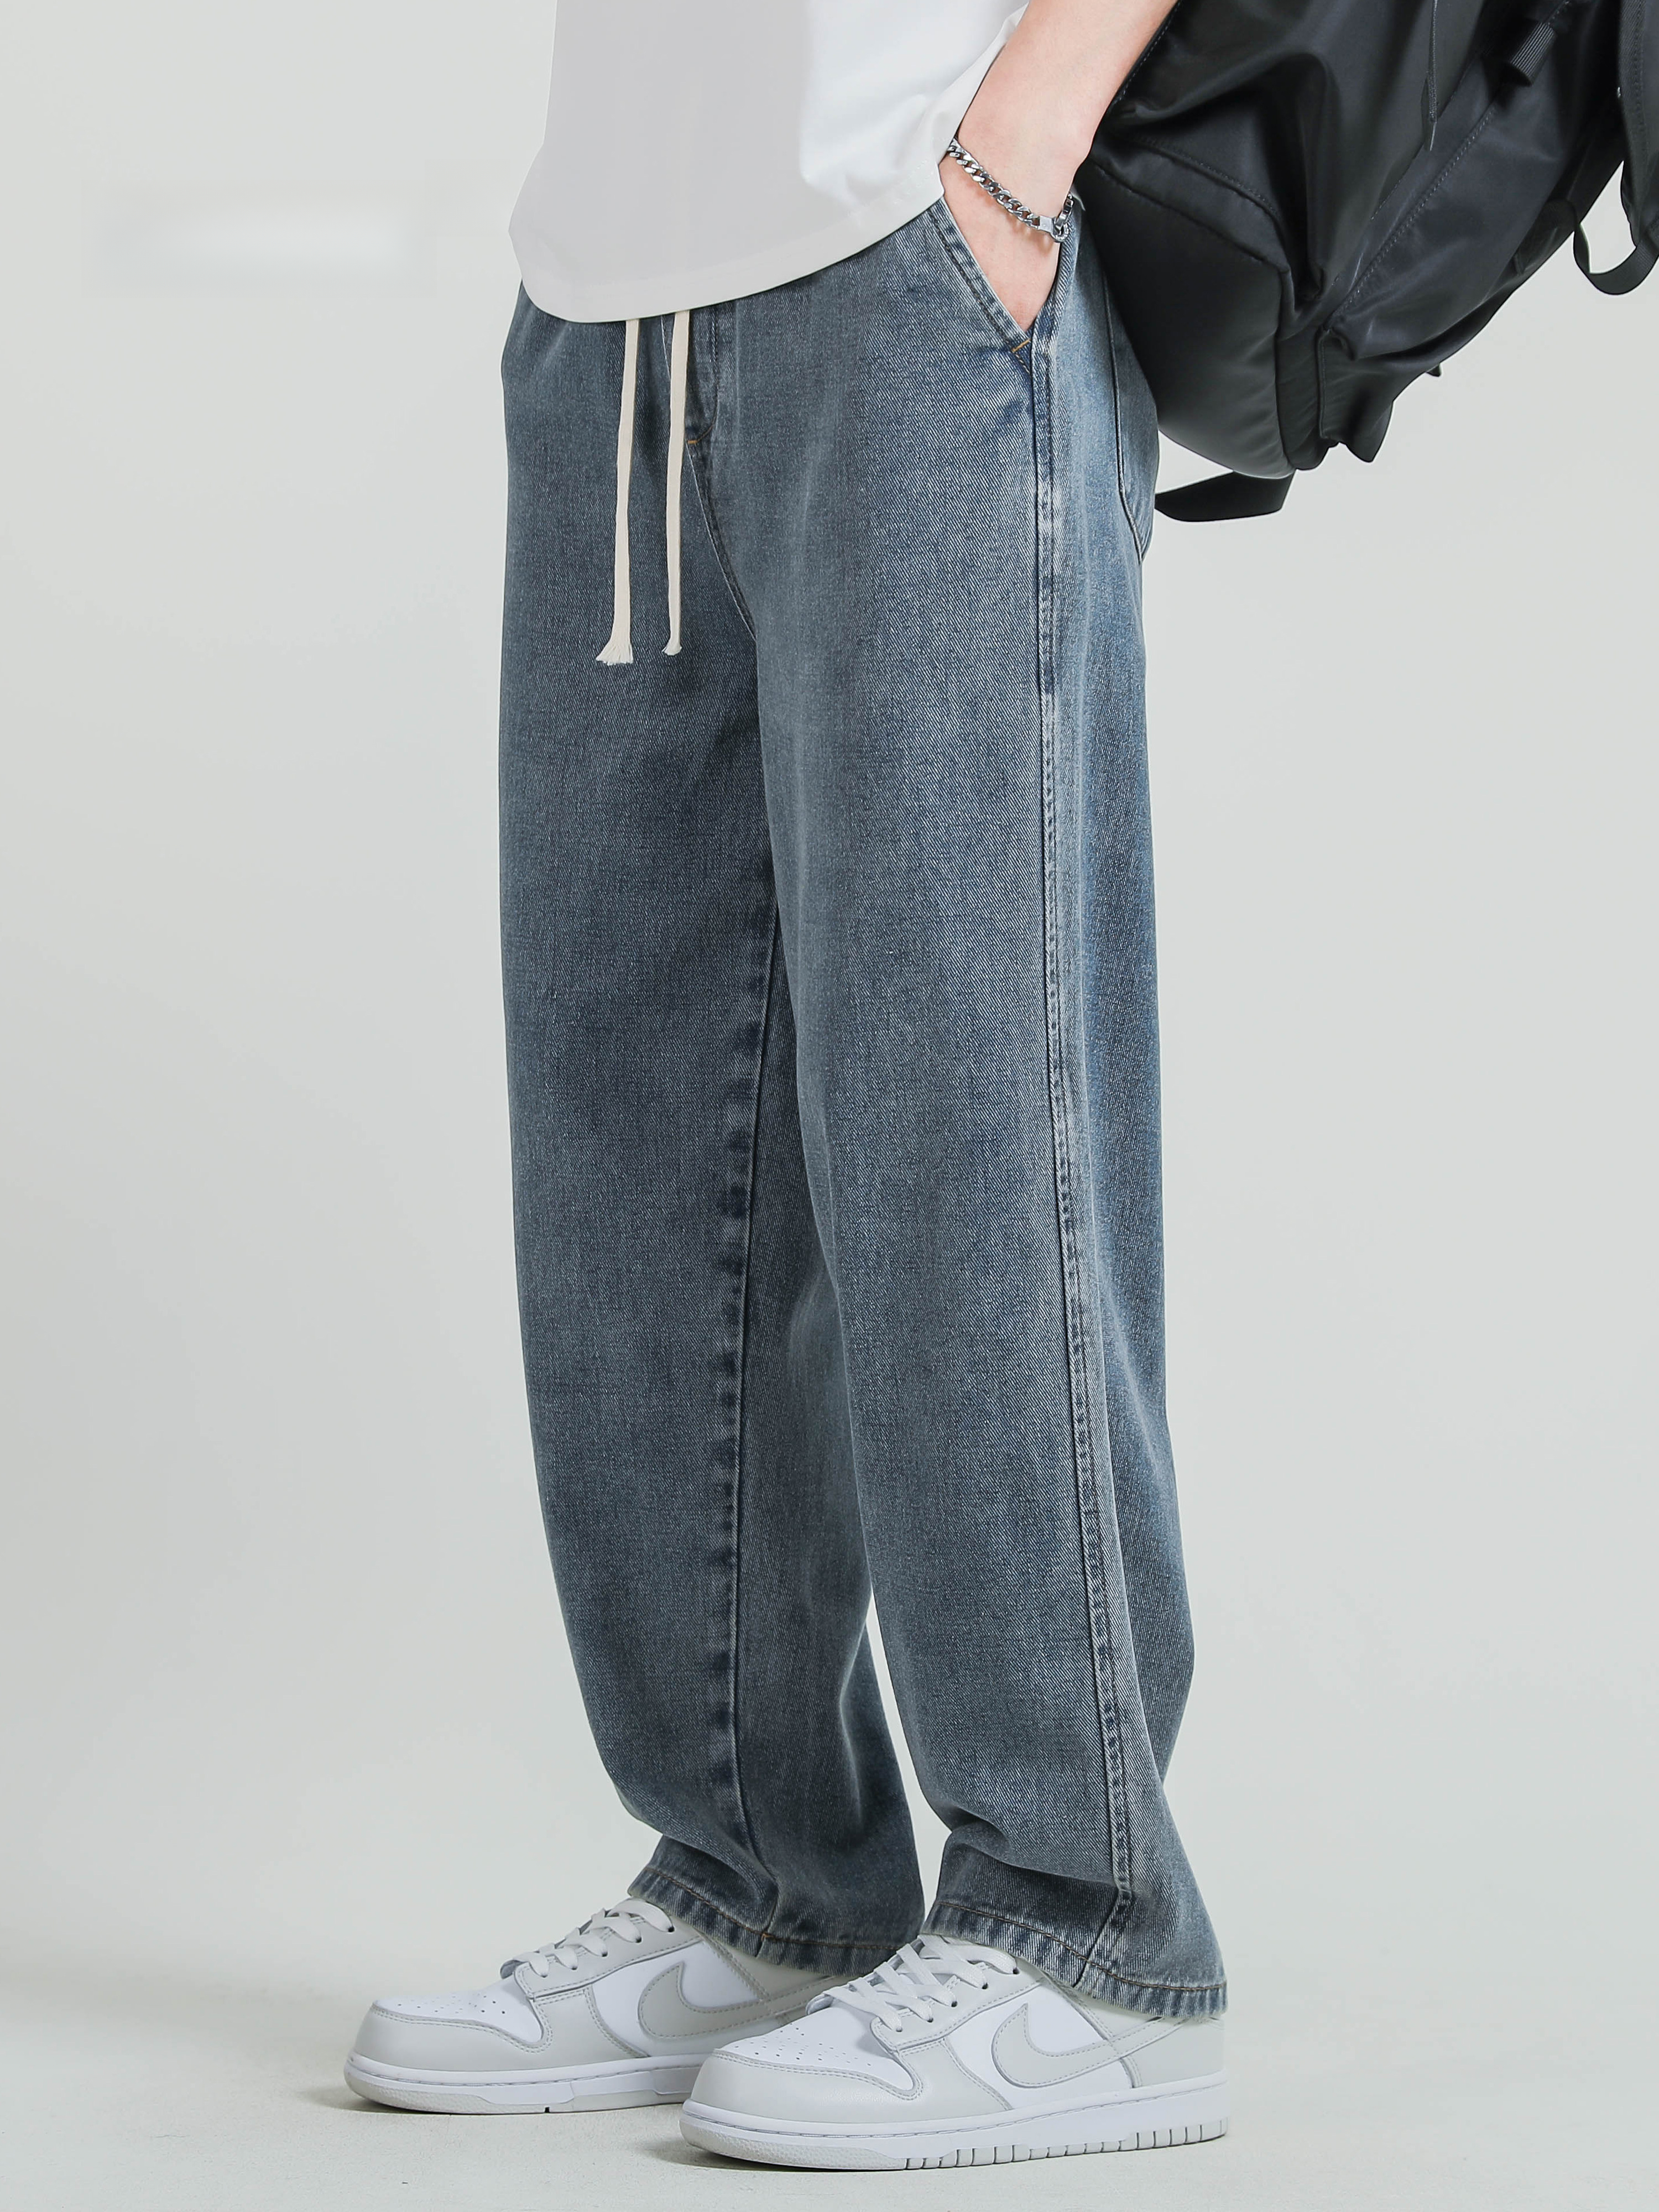 New Wide Leg Jeans for Men's Loose Fitting Straight Leg Floor Long Pants  Trend – the best products in the Joom Geek online store